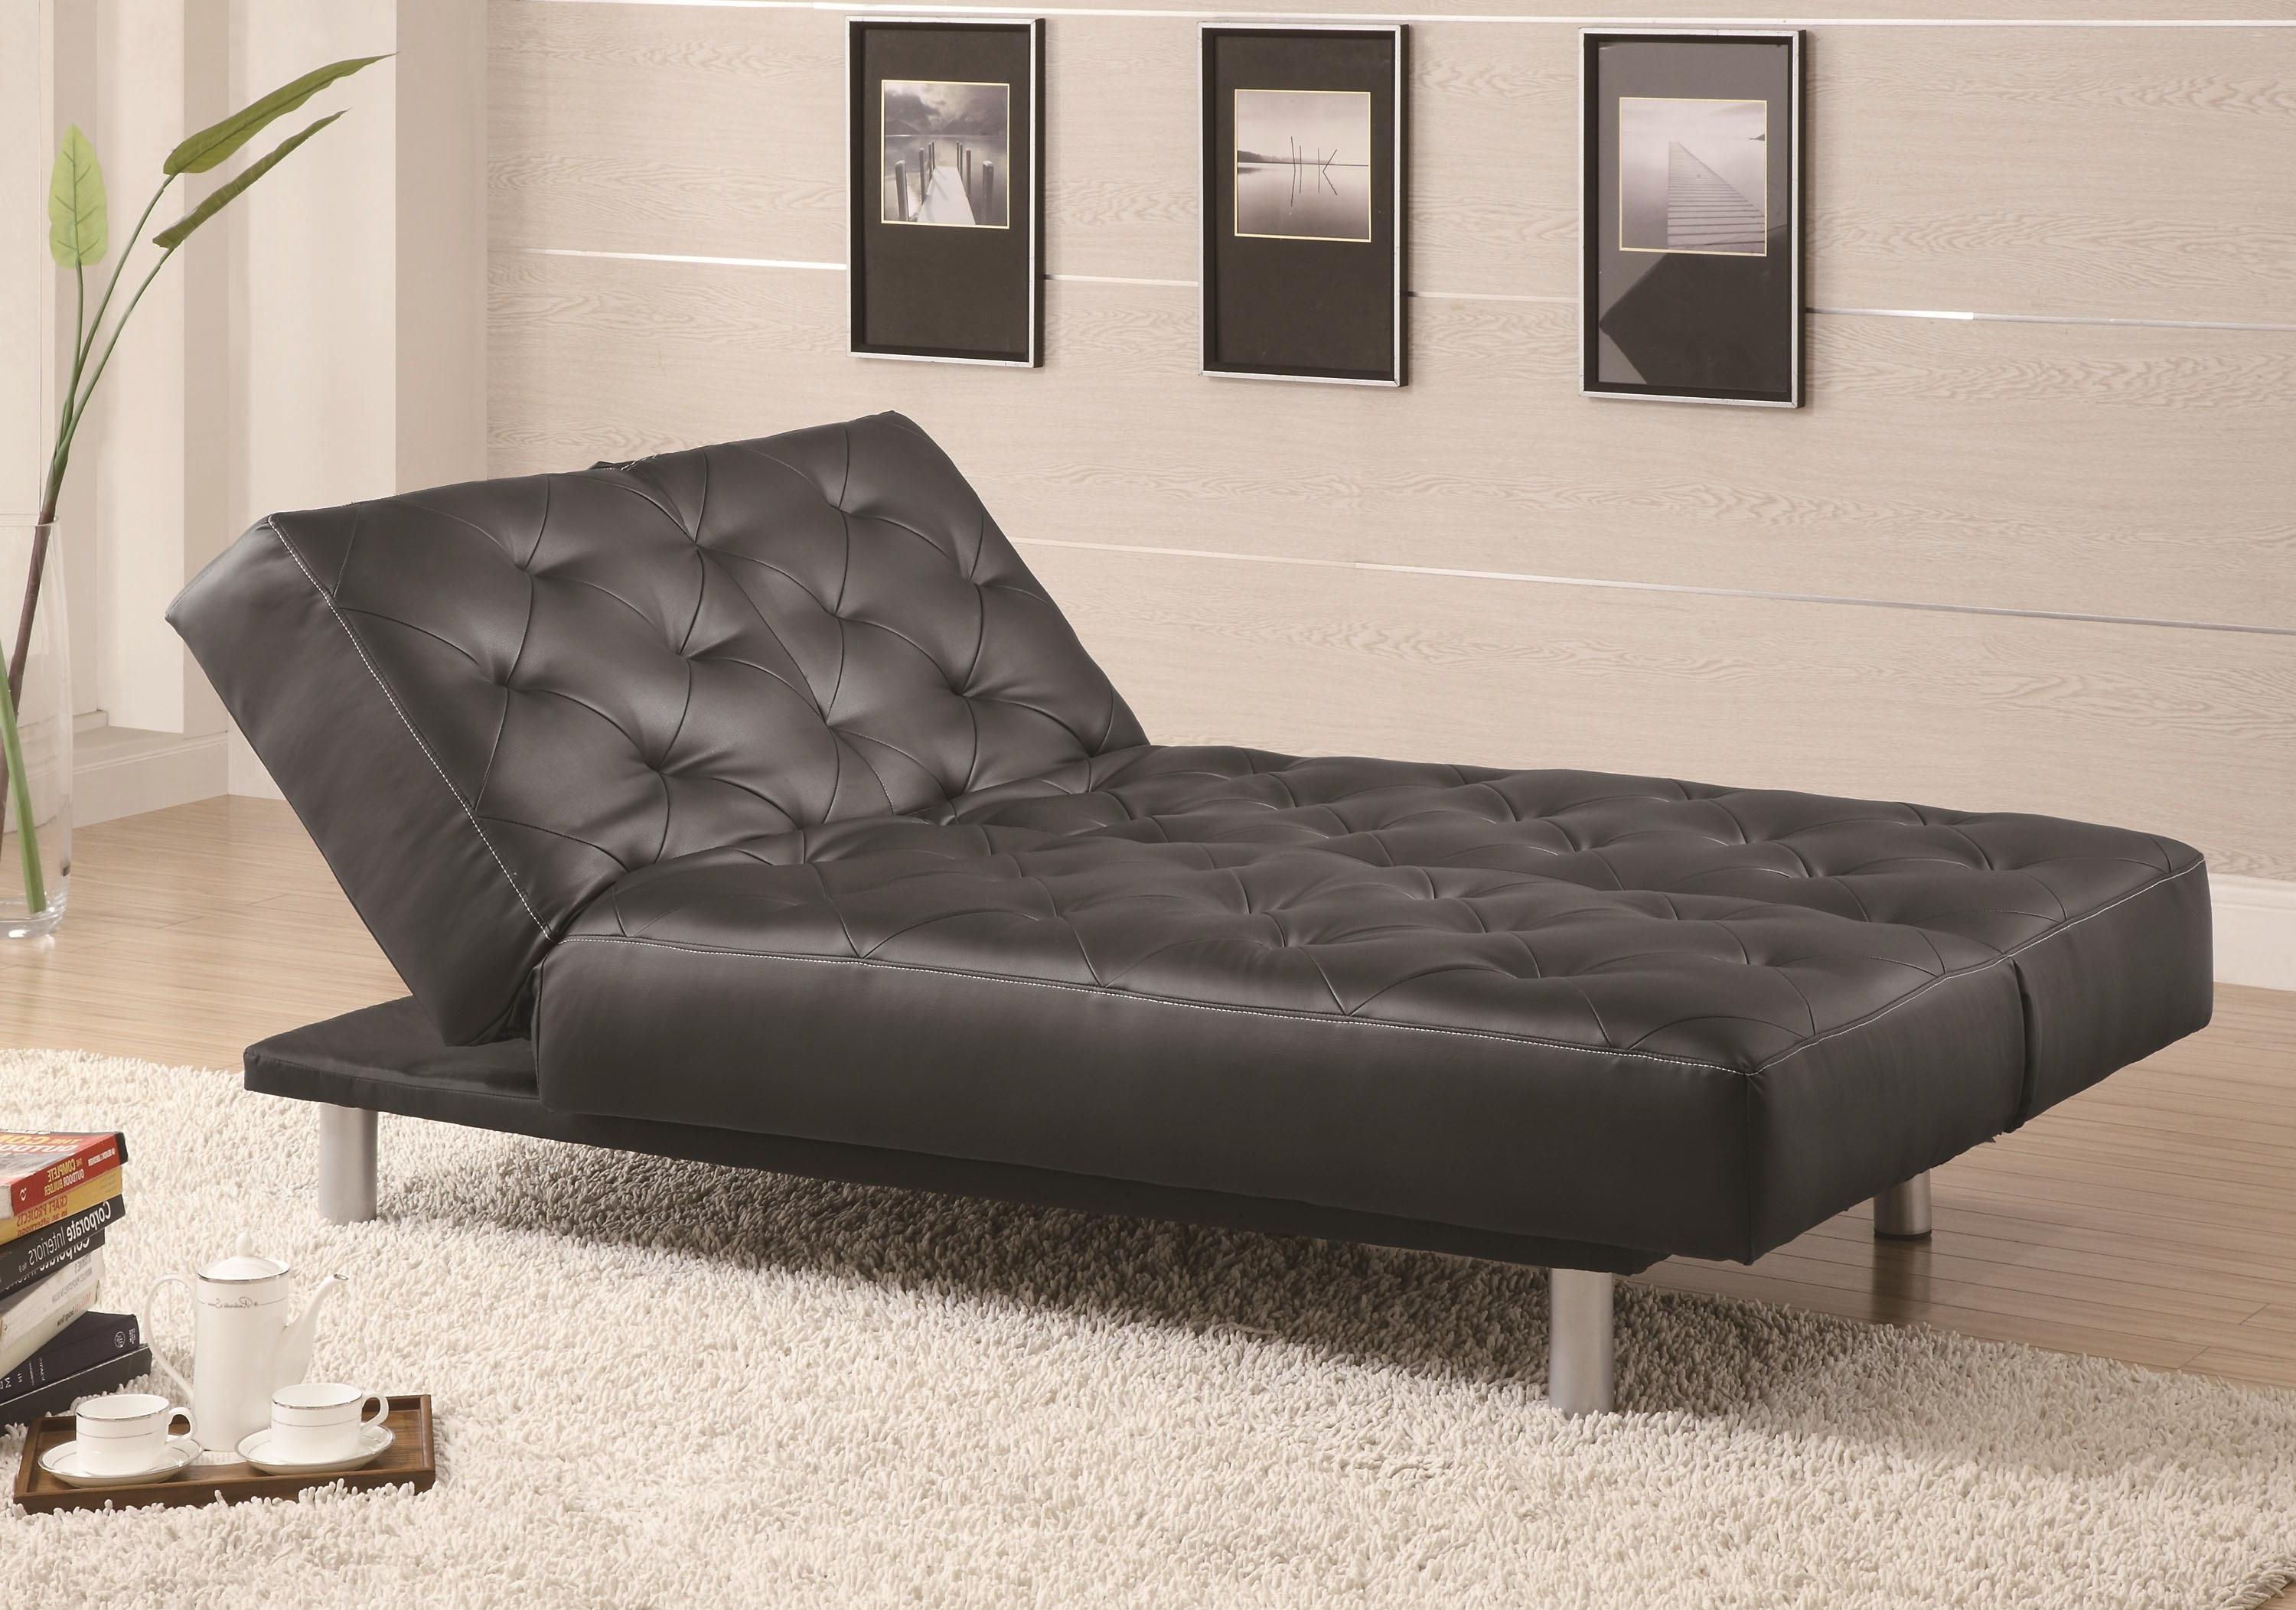 Coaster Sofa Beds And Futons Black Vinyl Tufted Sofa Bed/oversize Pertaining To Popular Futon Chaises (View 11 of 15)